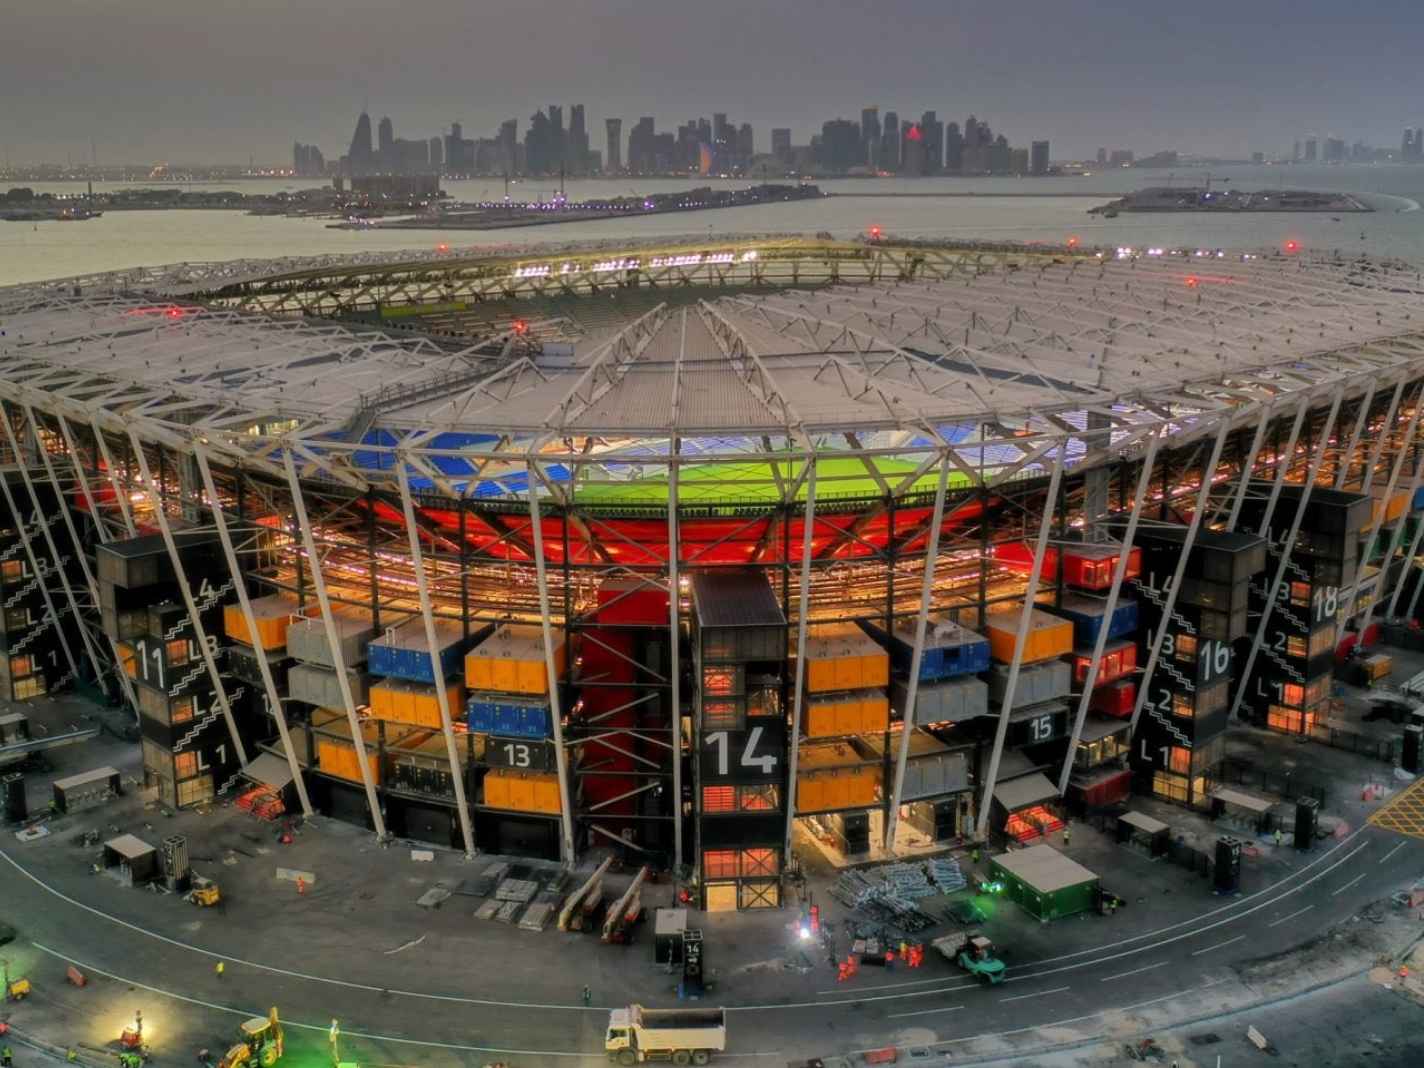 The Qatar World Cup stadium turning heads due to its Lego-inspired design